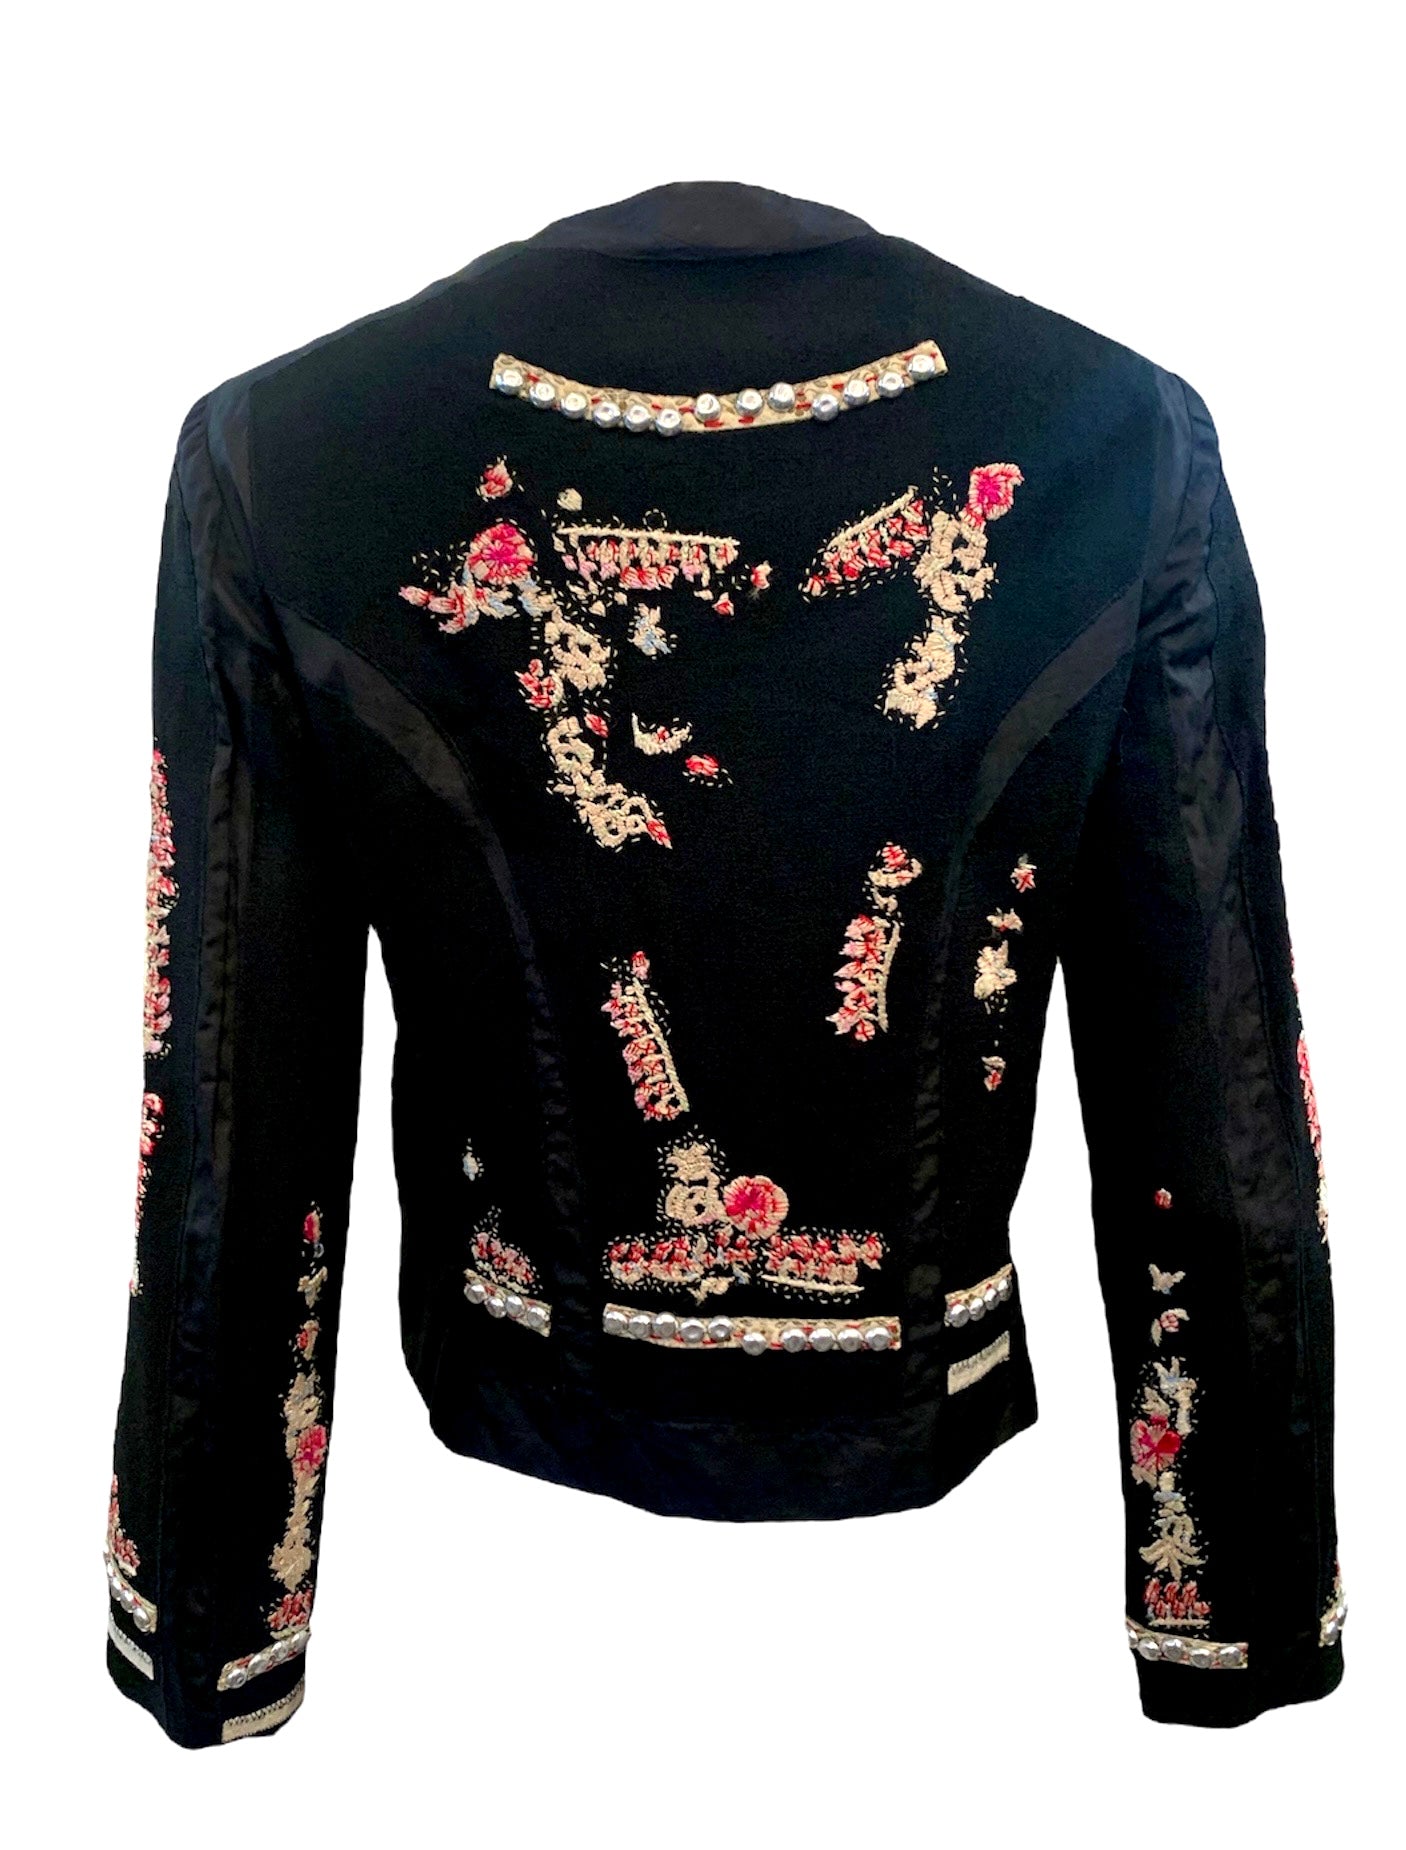 Moschino Early 2000s Embroidered Studded Folk Inspired Cropped Jacket BACK 3 of 6